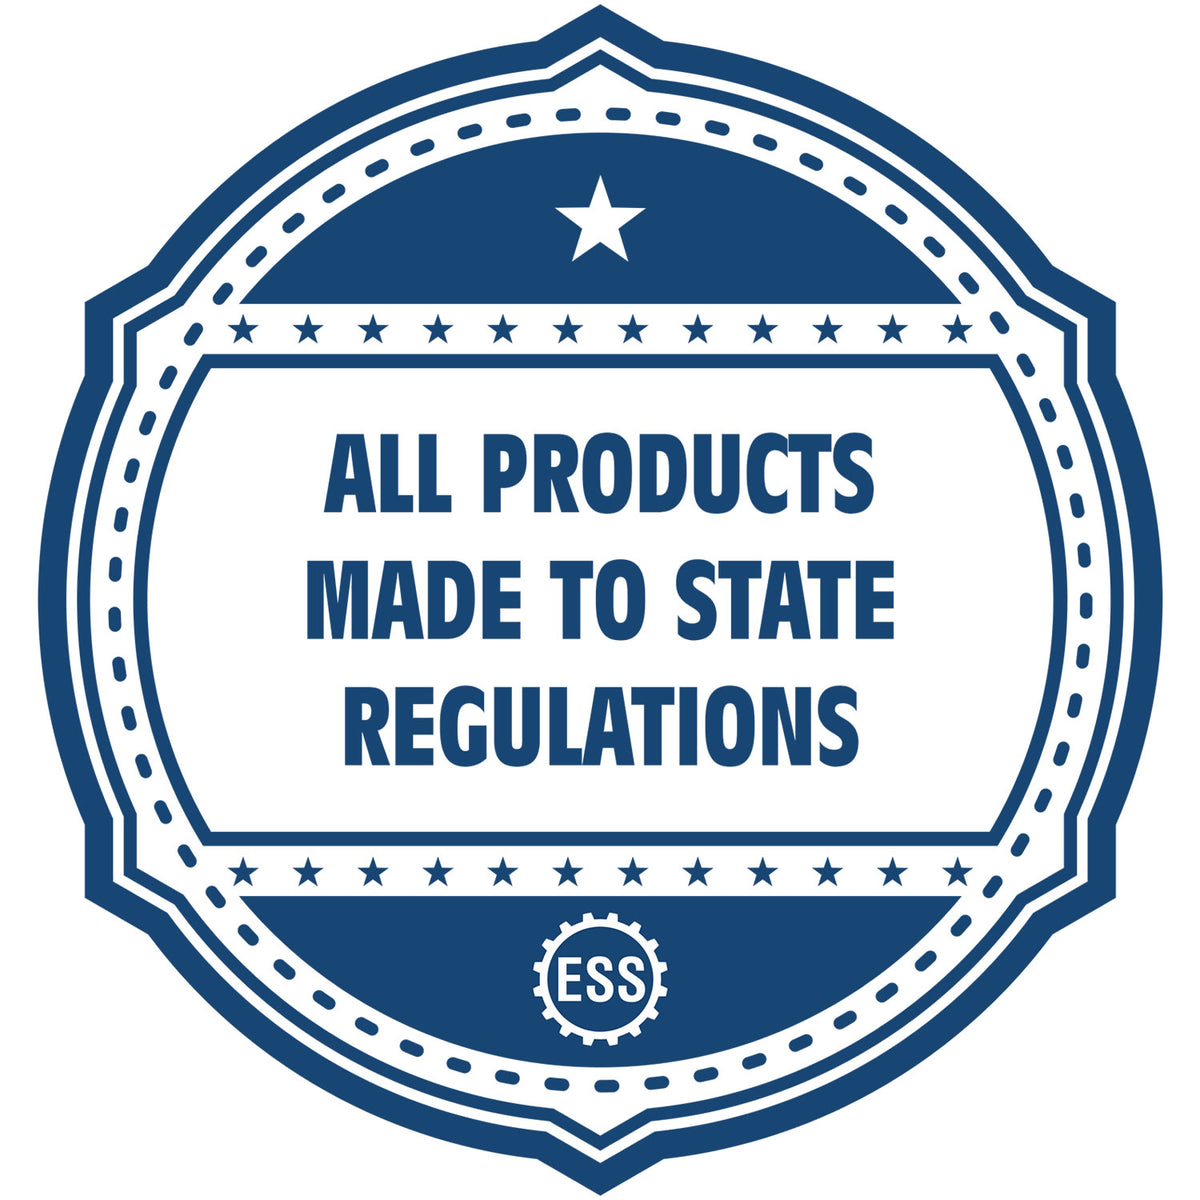 An icon or badge element for the Super Slim Guam Notary Public Stamp showing that this product is made in compliance with state regulations.